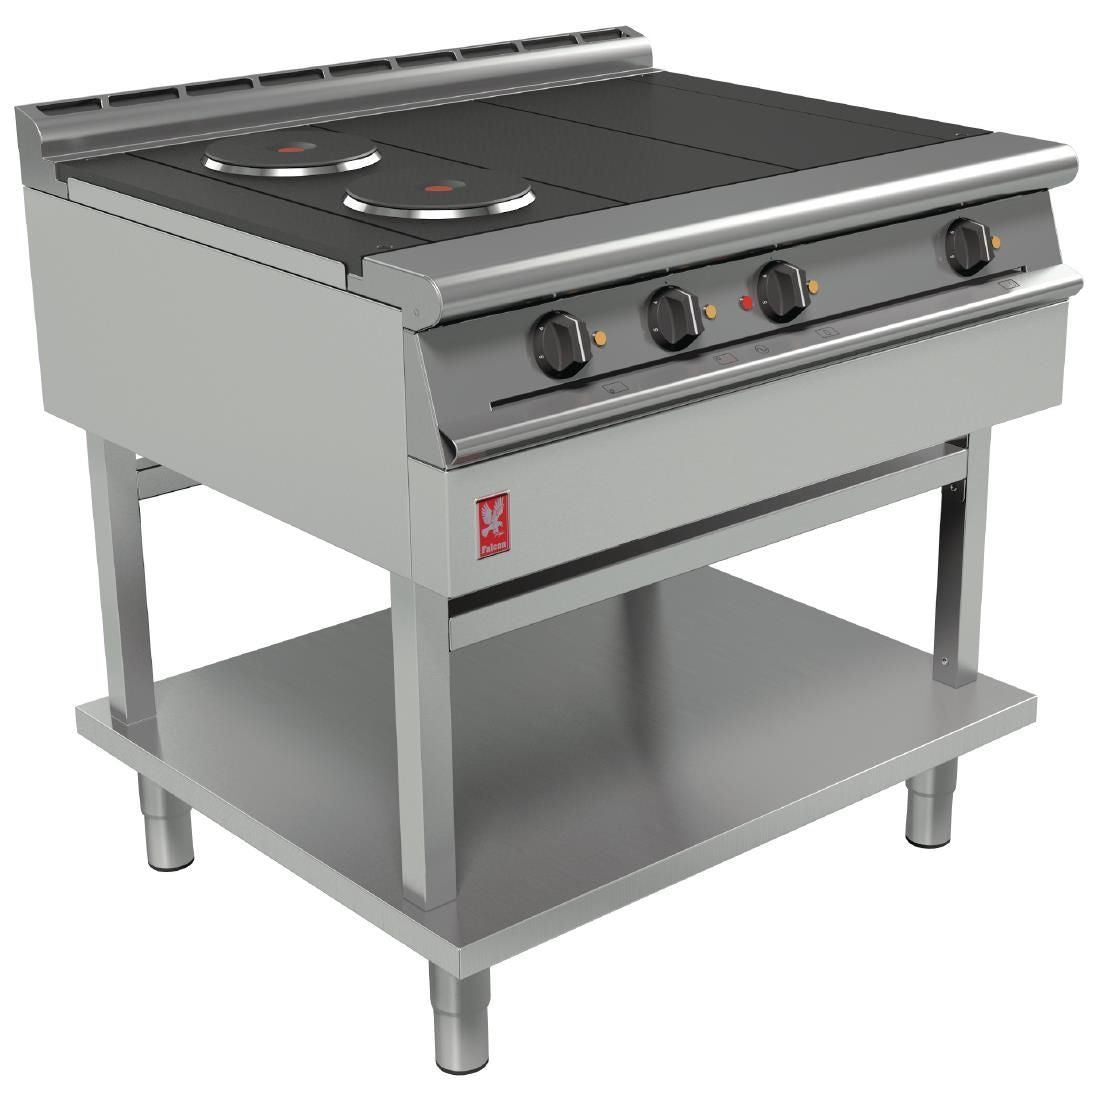 Falcon Dominator Plus 4 Hotplate Boiling Table E3121 JD Catering Equipment Solutions Ltd